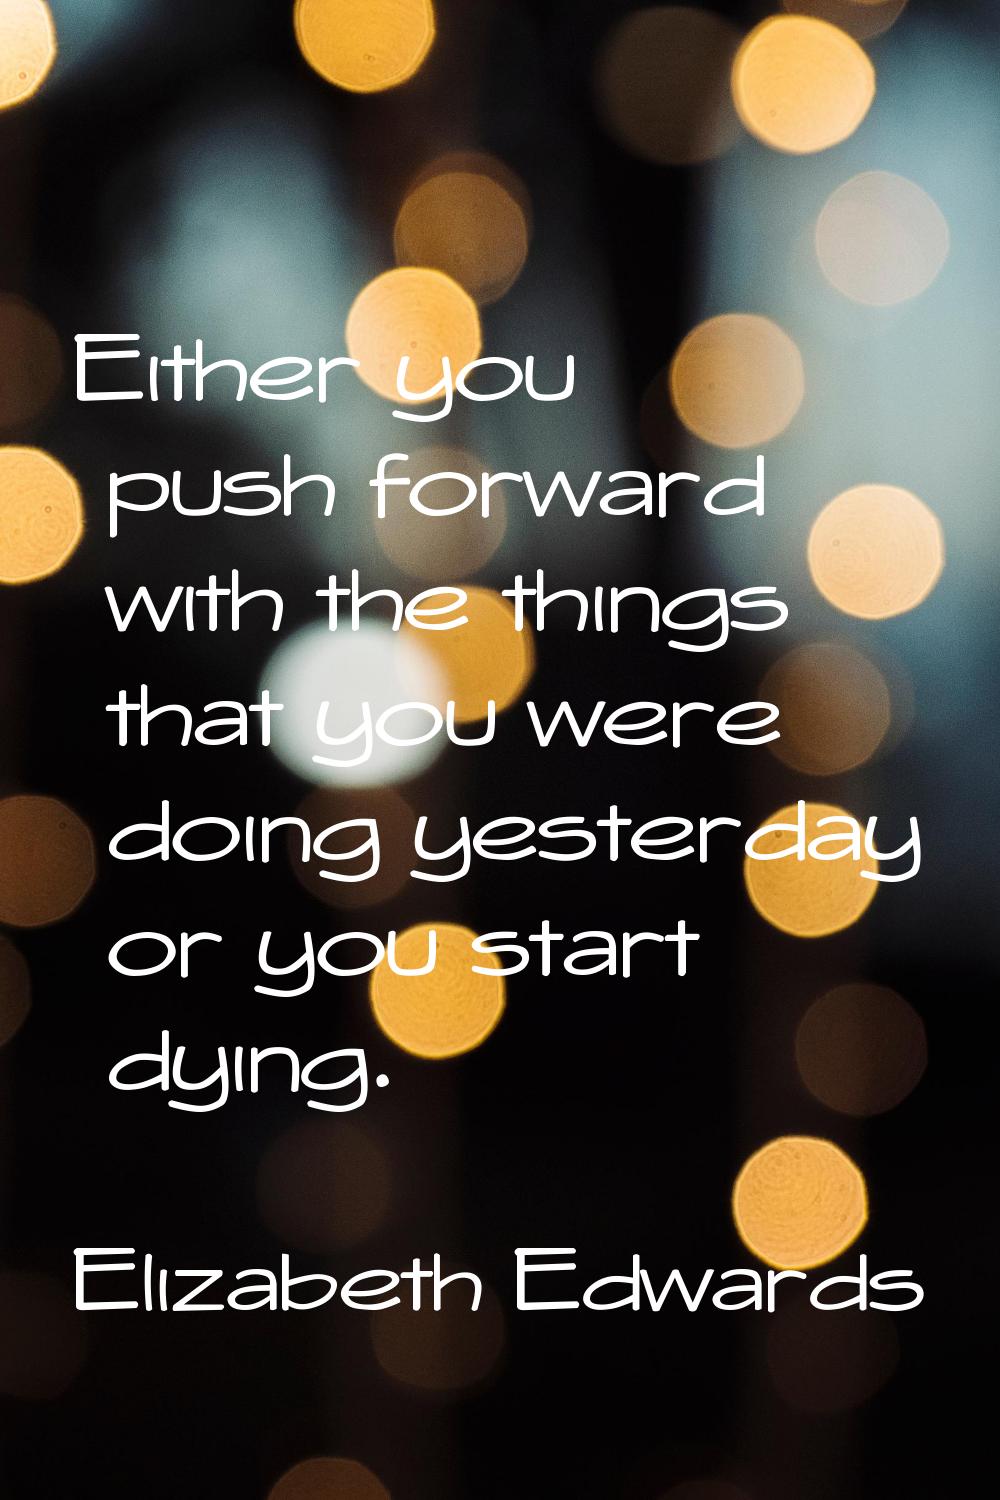 Either you push forward with the things that you were doing yesterday or you start dying.